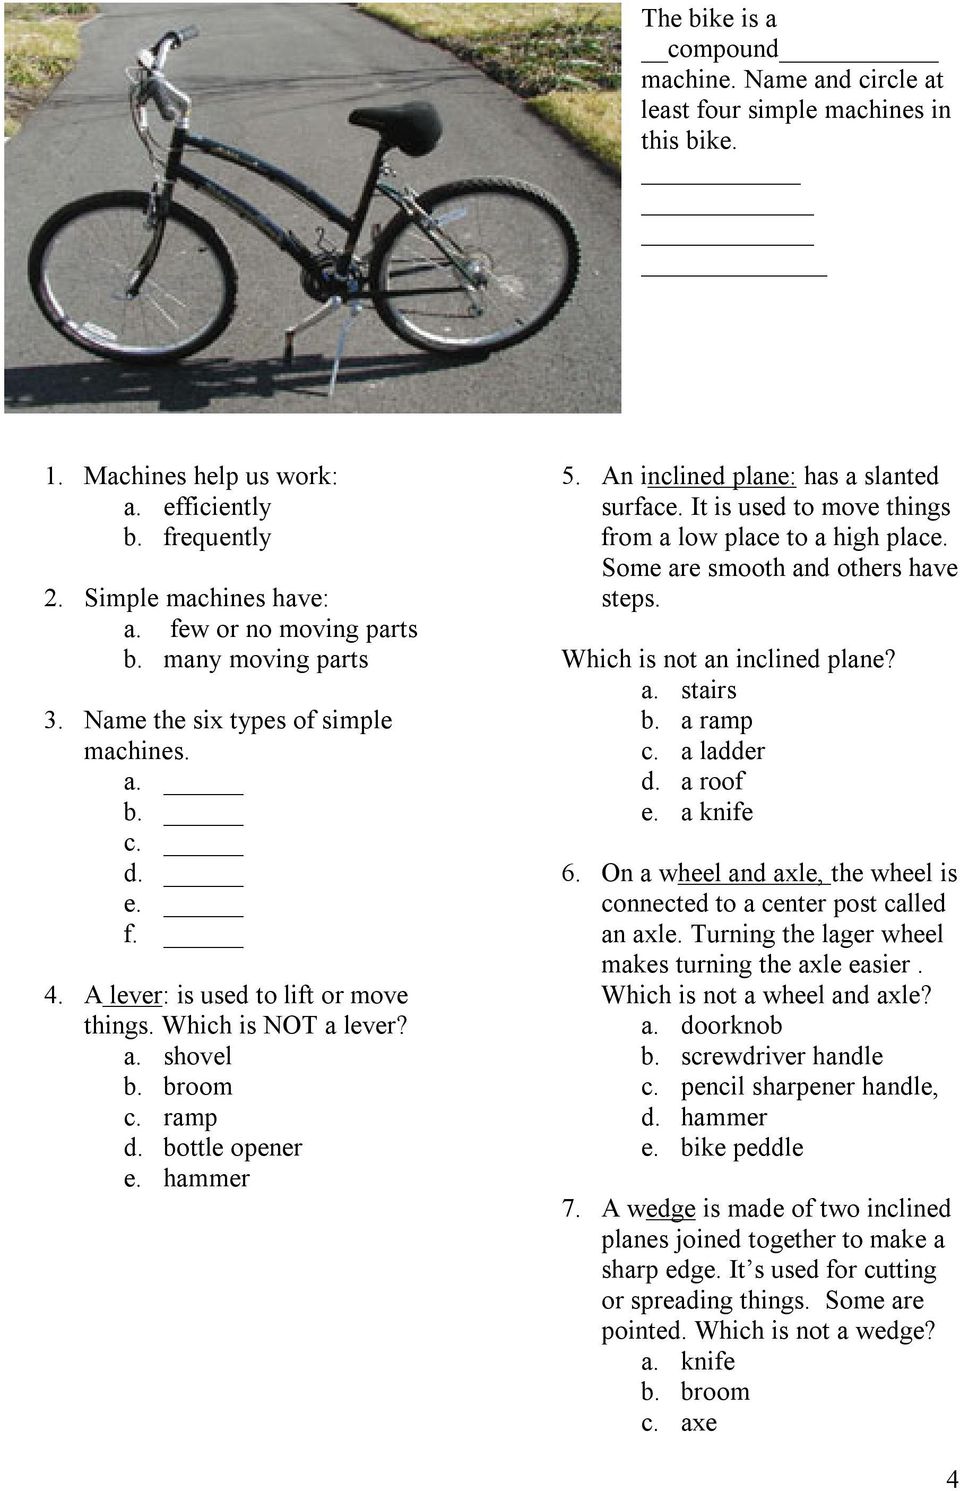 is bicycle a simple machine